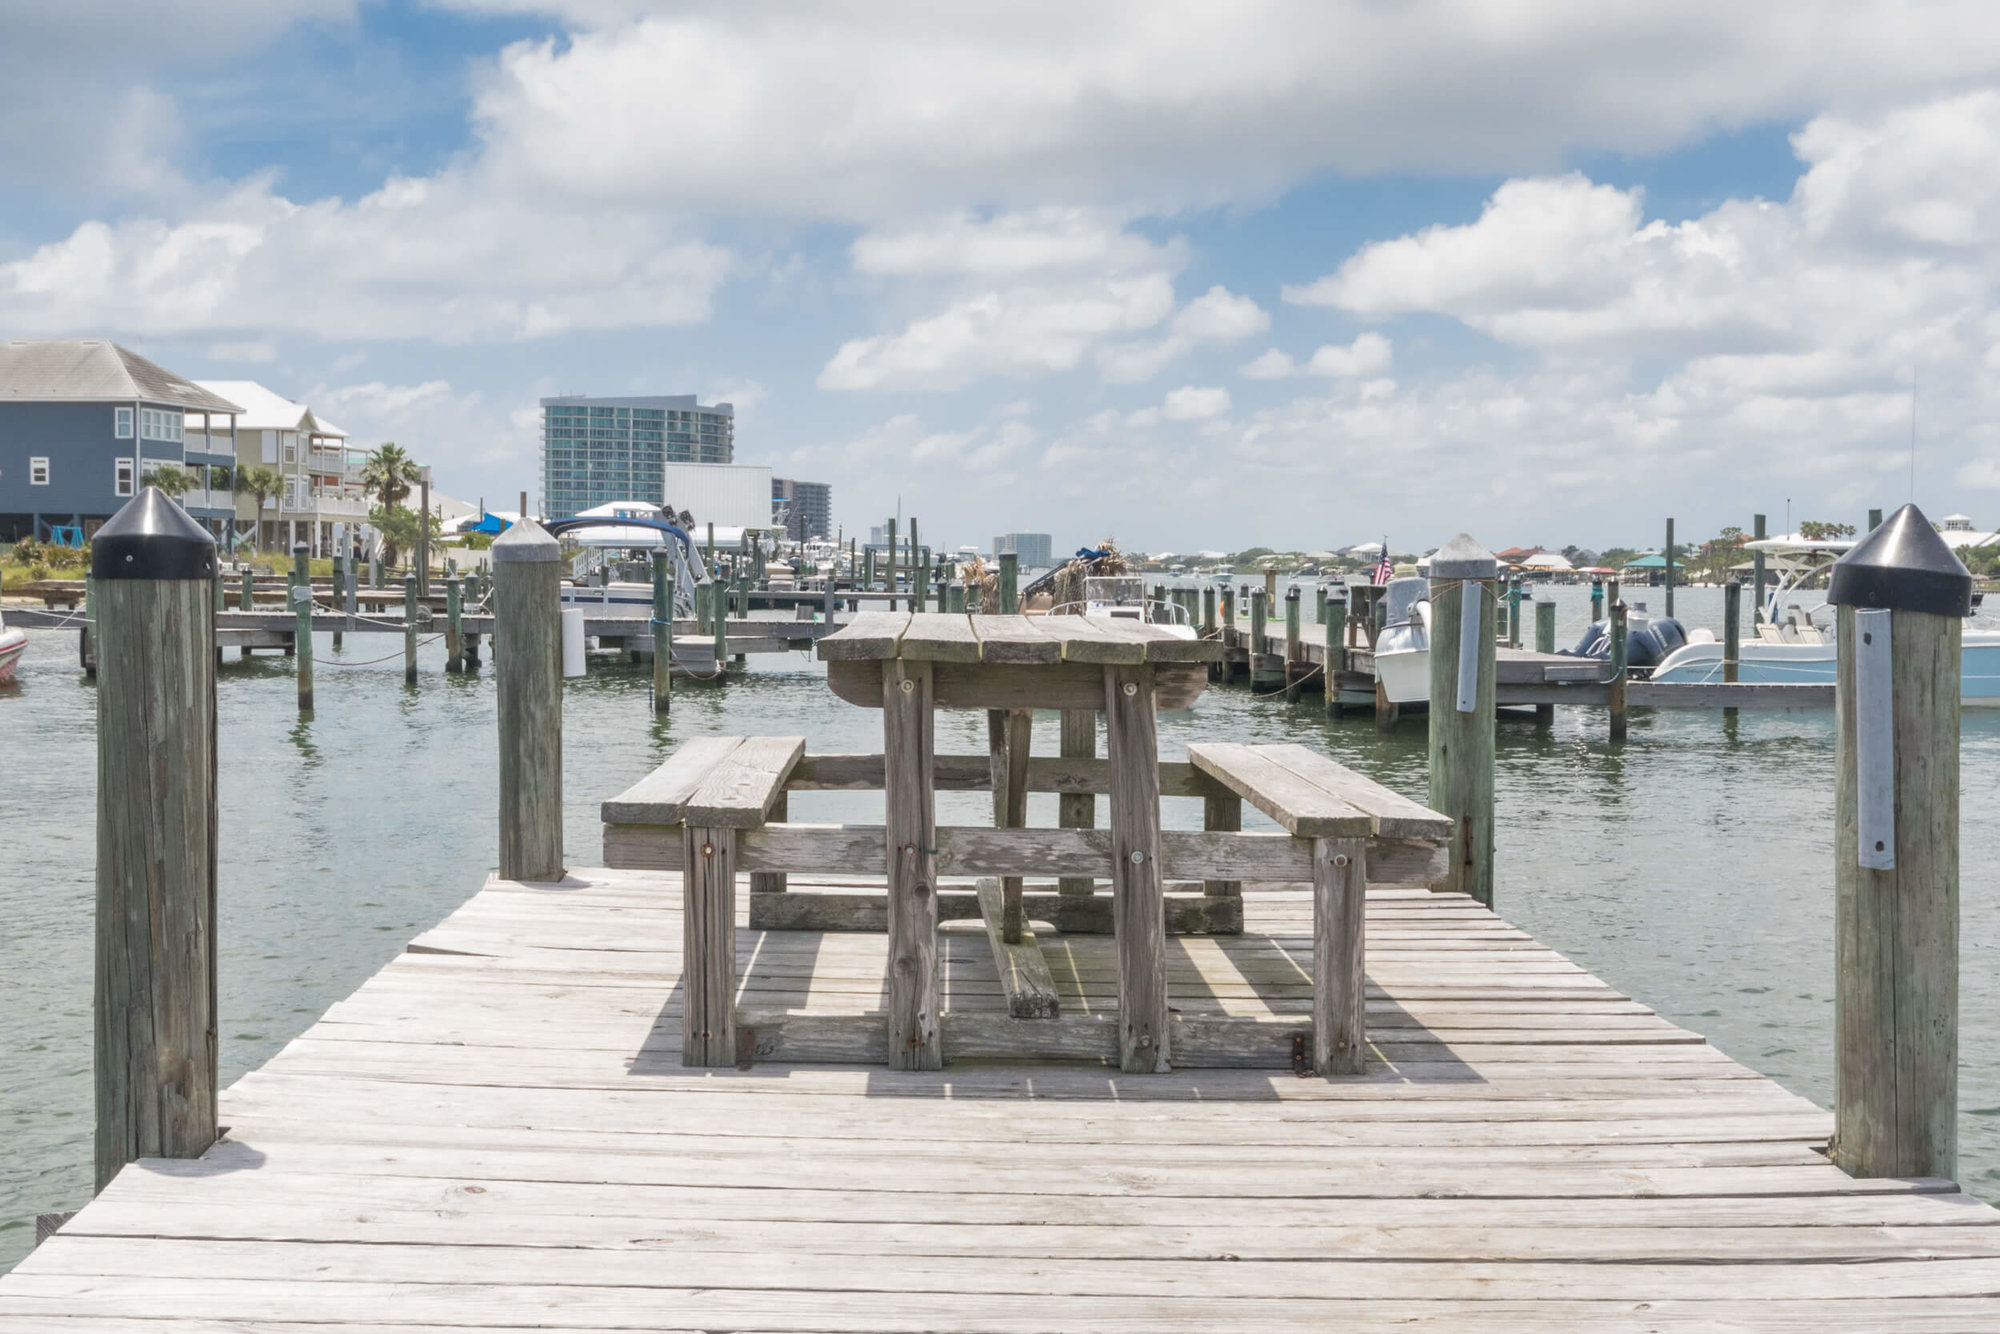 Watch the boats go by sitting on the dockside picnic table at Pescador Landing condos in Perdido Key